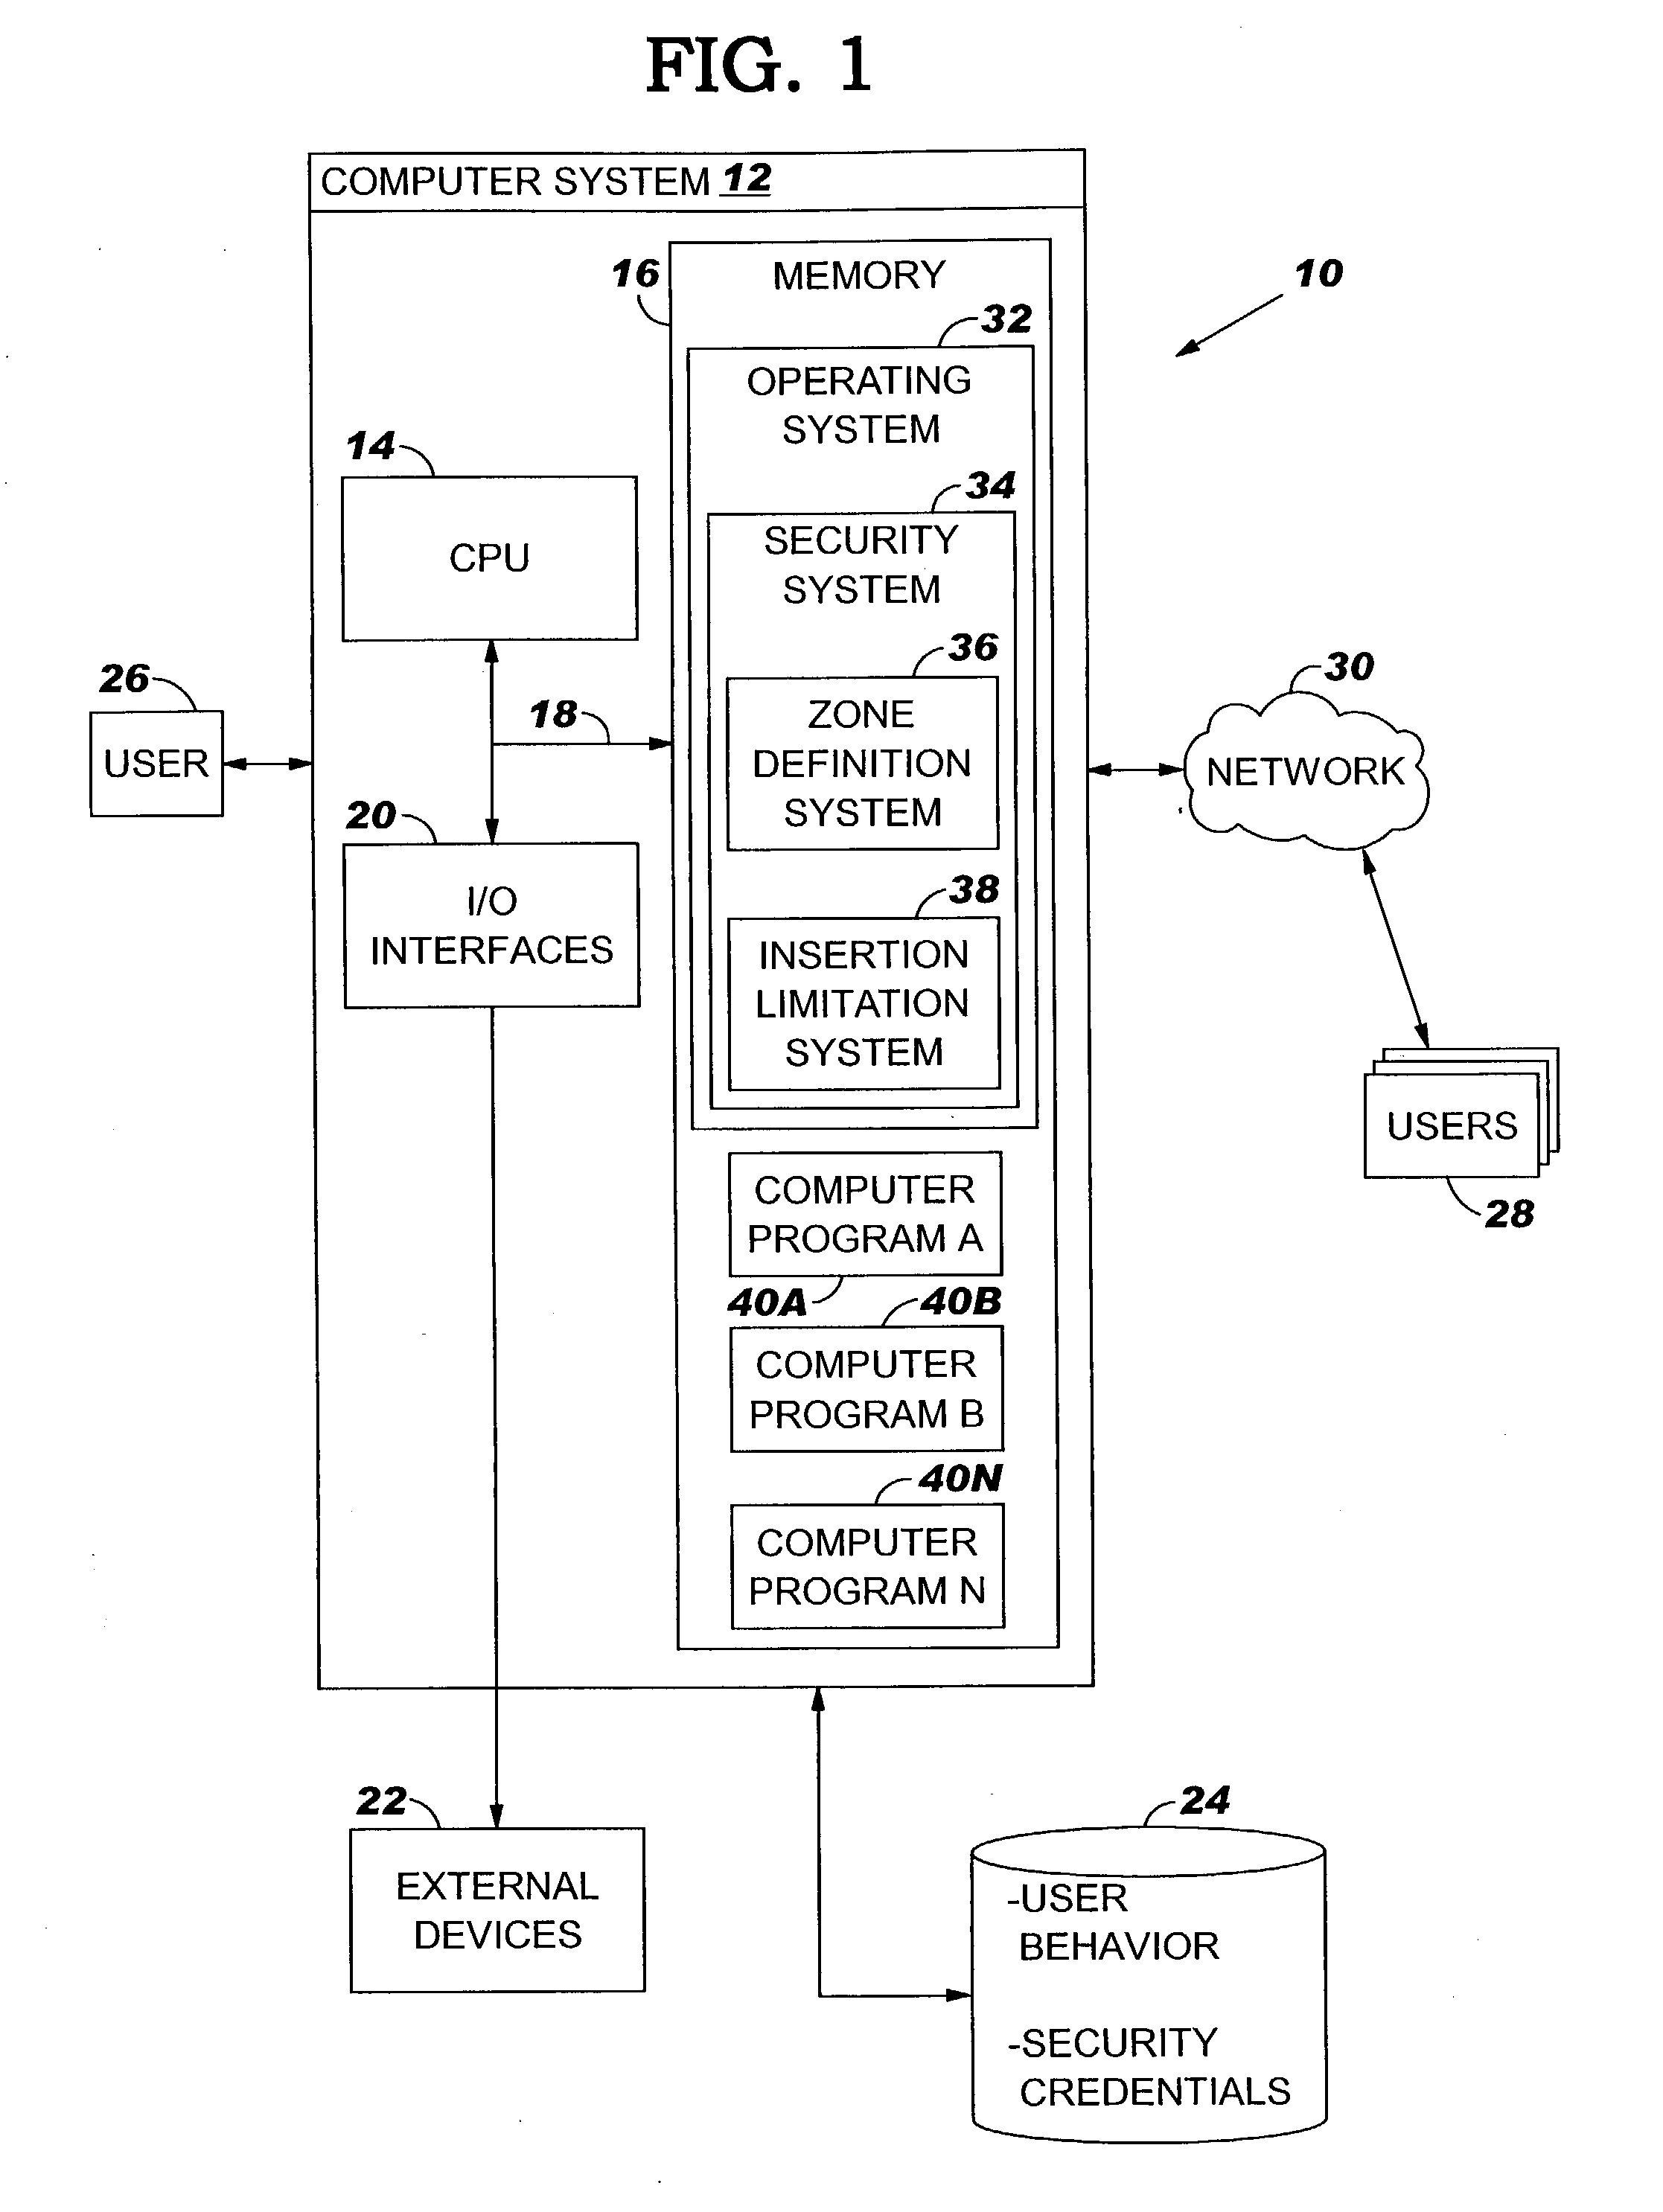 Method, system and program product for limiting insertion of content between computer programs